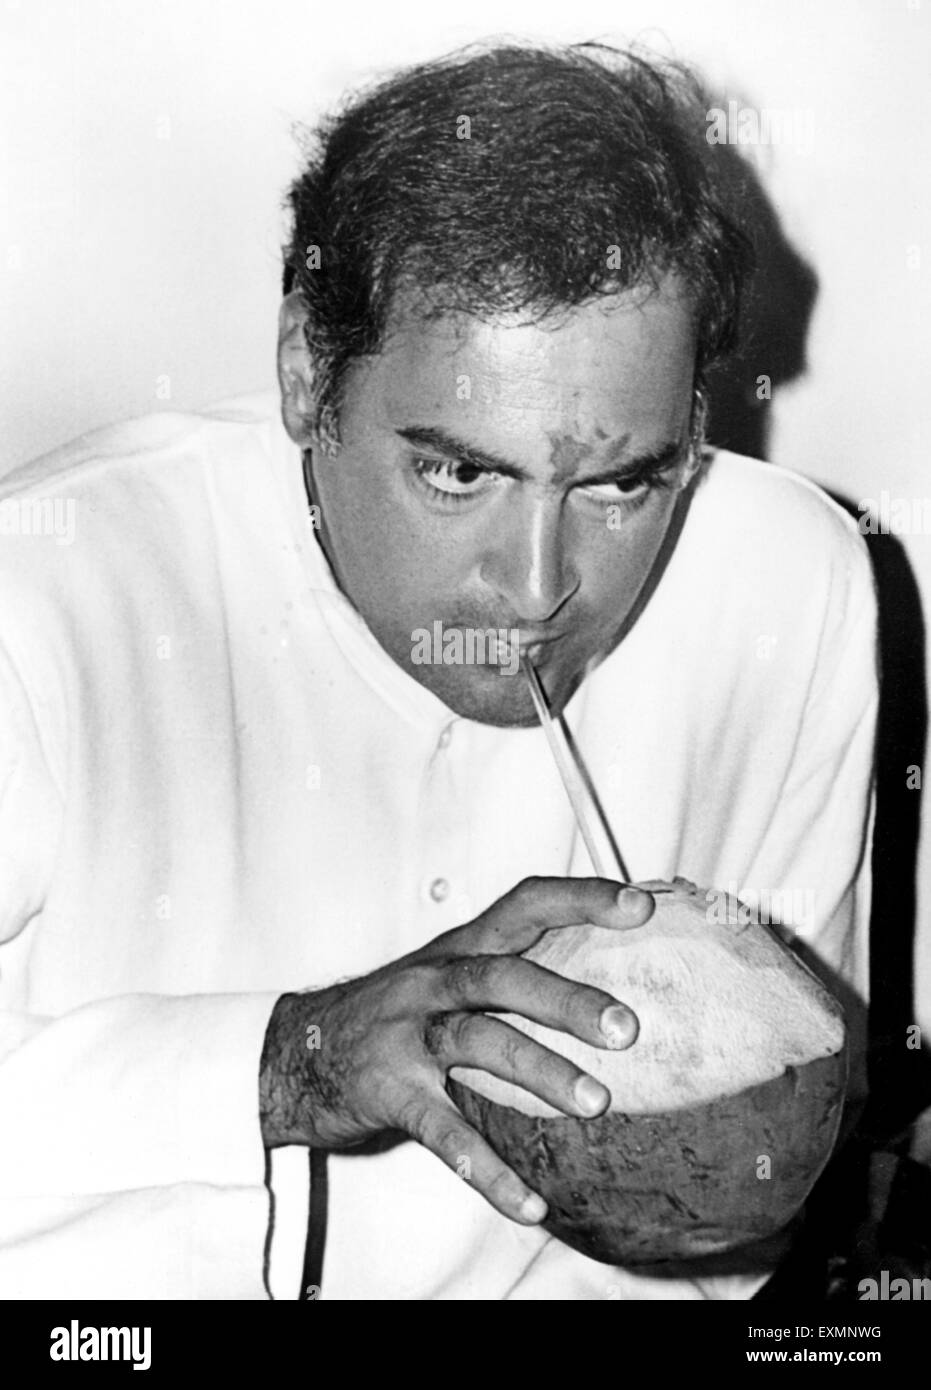 Indian politician of Indian National Congress Party and former Prime Minister Rajiv Gandhi drinking coconut water Stock Photo